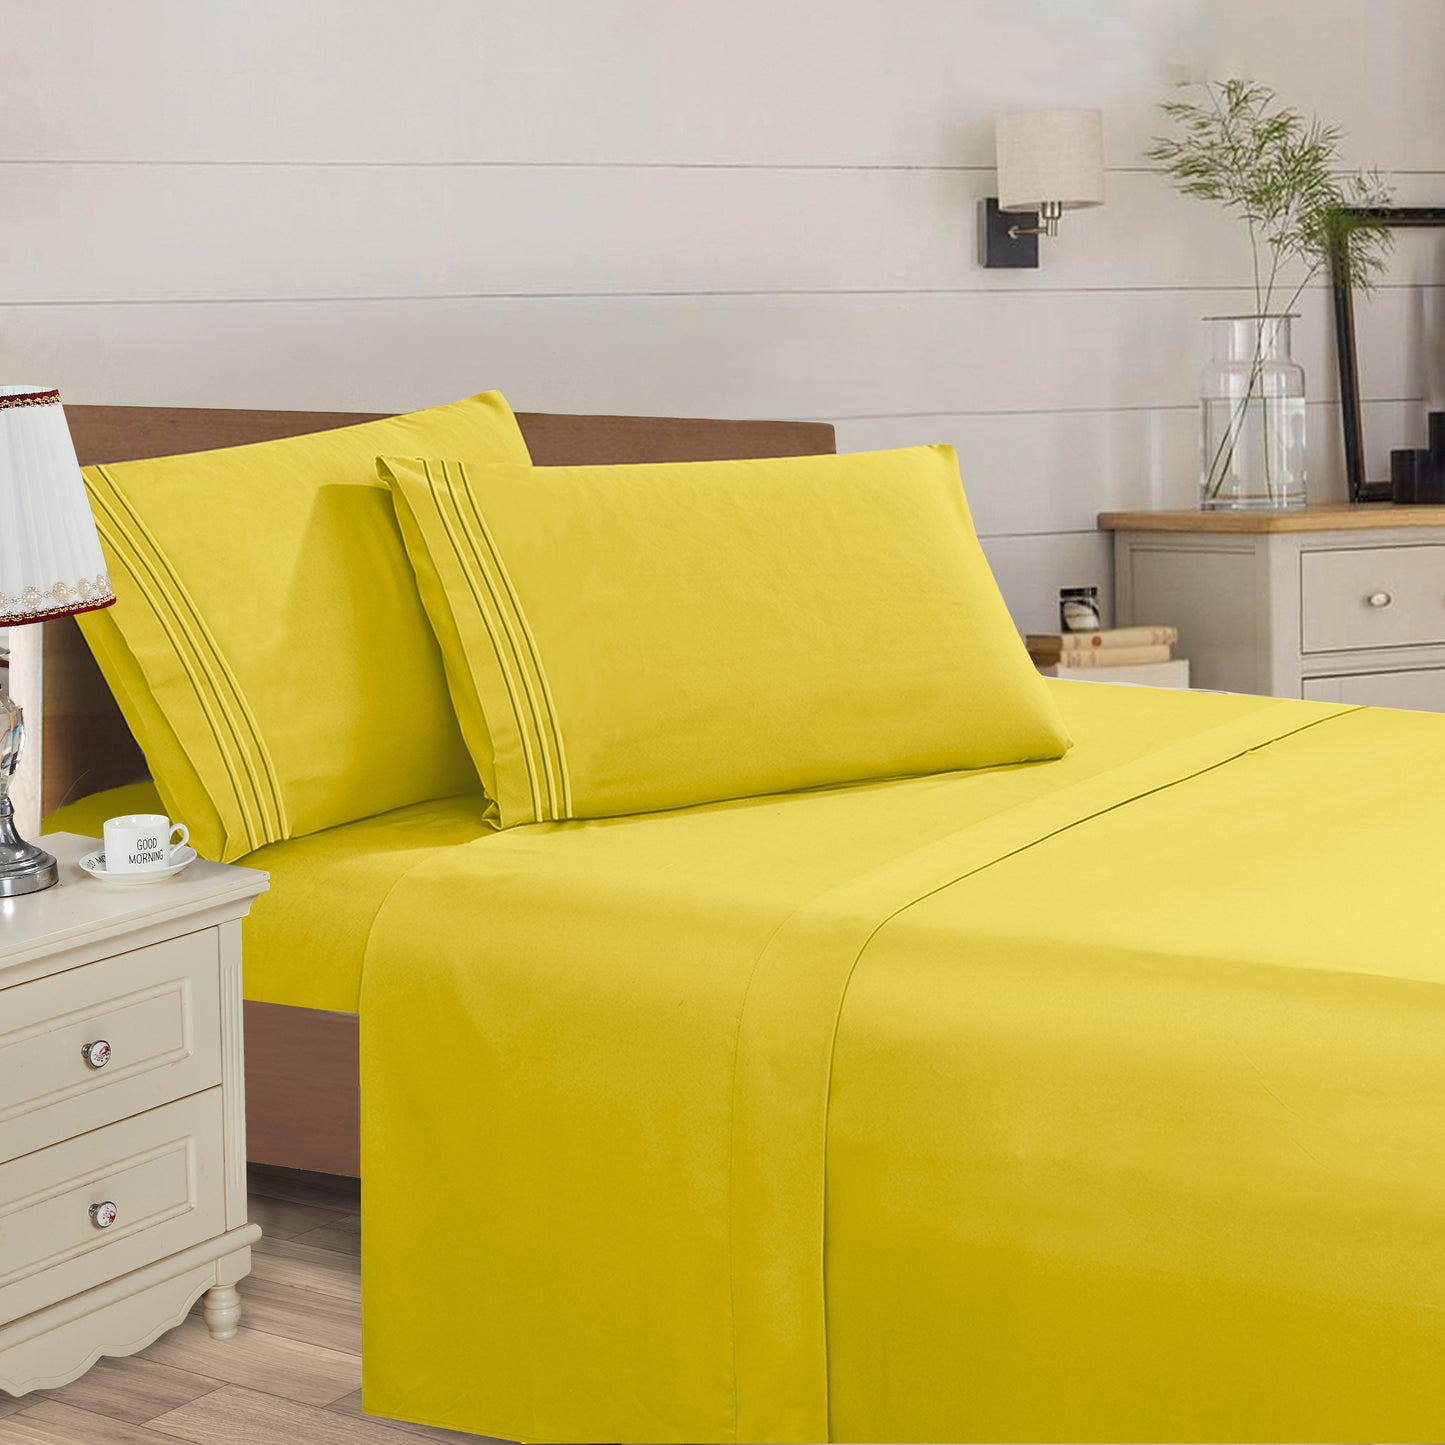 Elegant Comfort Essential Solid 3 Line Embroidery - Soft as a Hotel Premium Quality, 4-Piece Sheet Set, Bright Shades